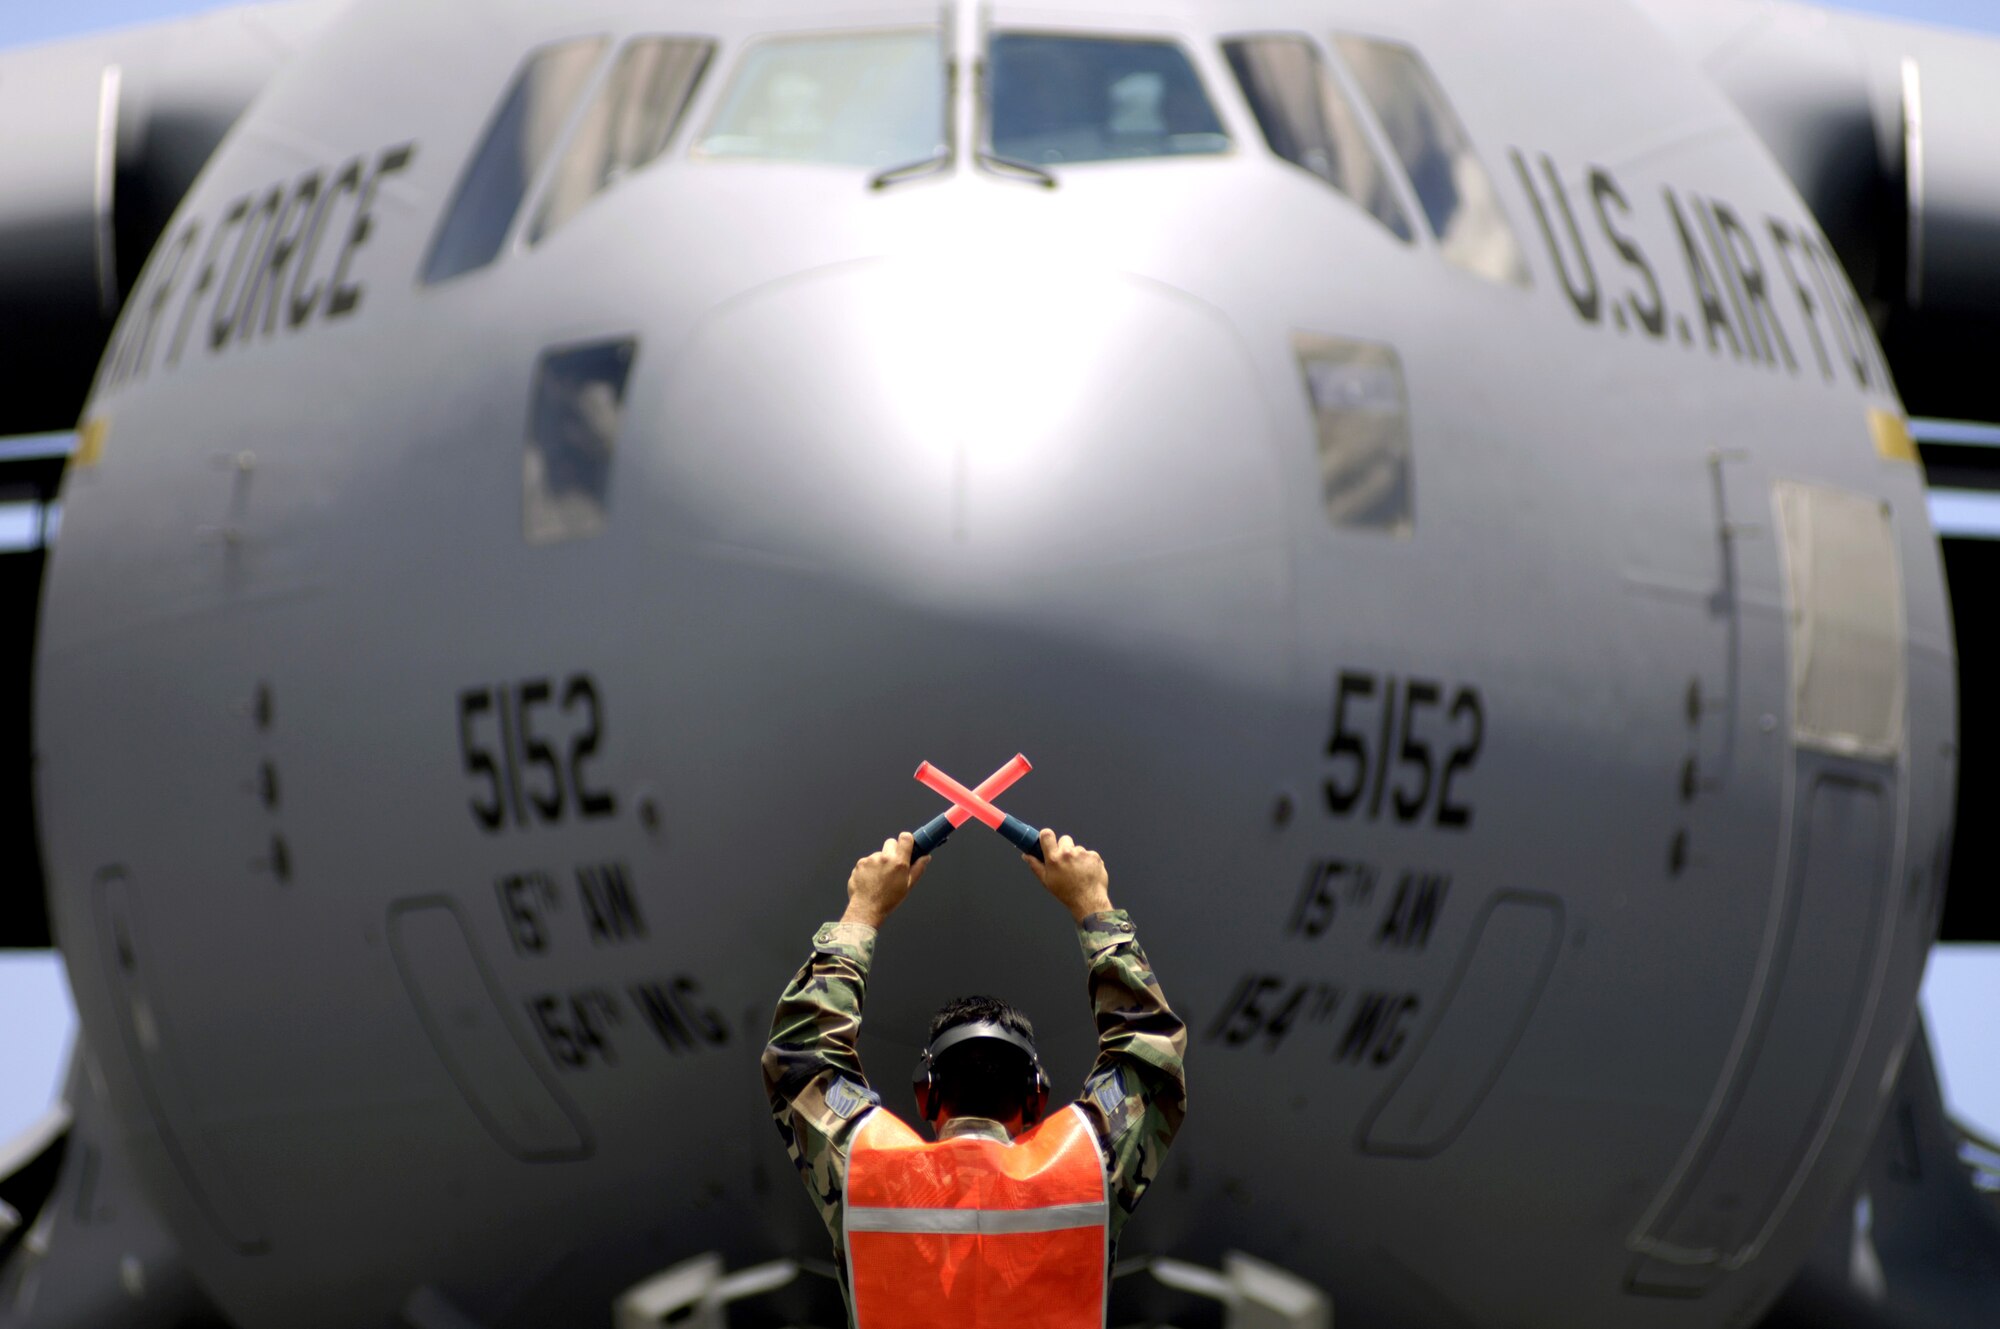 Tech. Sgt. Ronald Timbreza marshals a C-17 Globemaster III to its parking spot at Hickam Air Force Base, Hawaii, on Wednesday, June 14. The "Spirit of 'Go for Broke'" is named in honor of the 442nd Regimental Combat Team. The 442nd, comprised of 3,800 Japanese Americans, fought with distinction during World War II in North Africa and Europe, becoming one of the most highly decorated units in the history of the U.S. military. (U.S. Air Force photo/Tech. Sgt. Shane A. Cuomo)